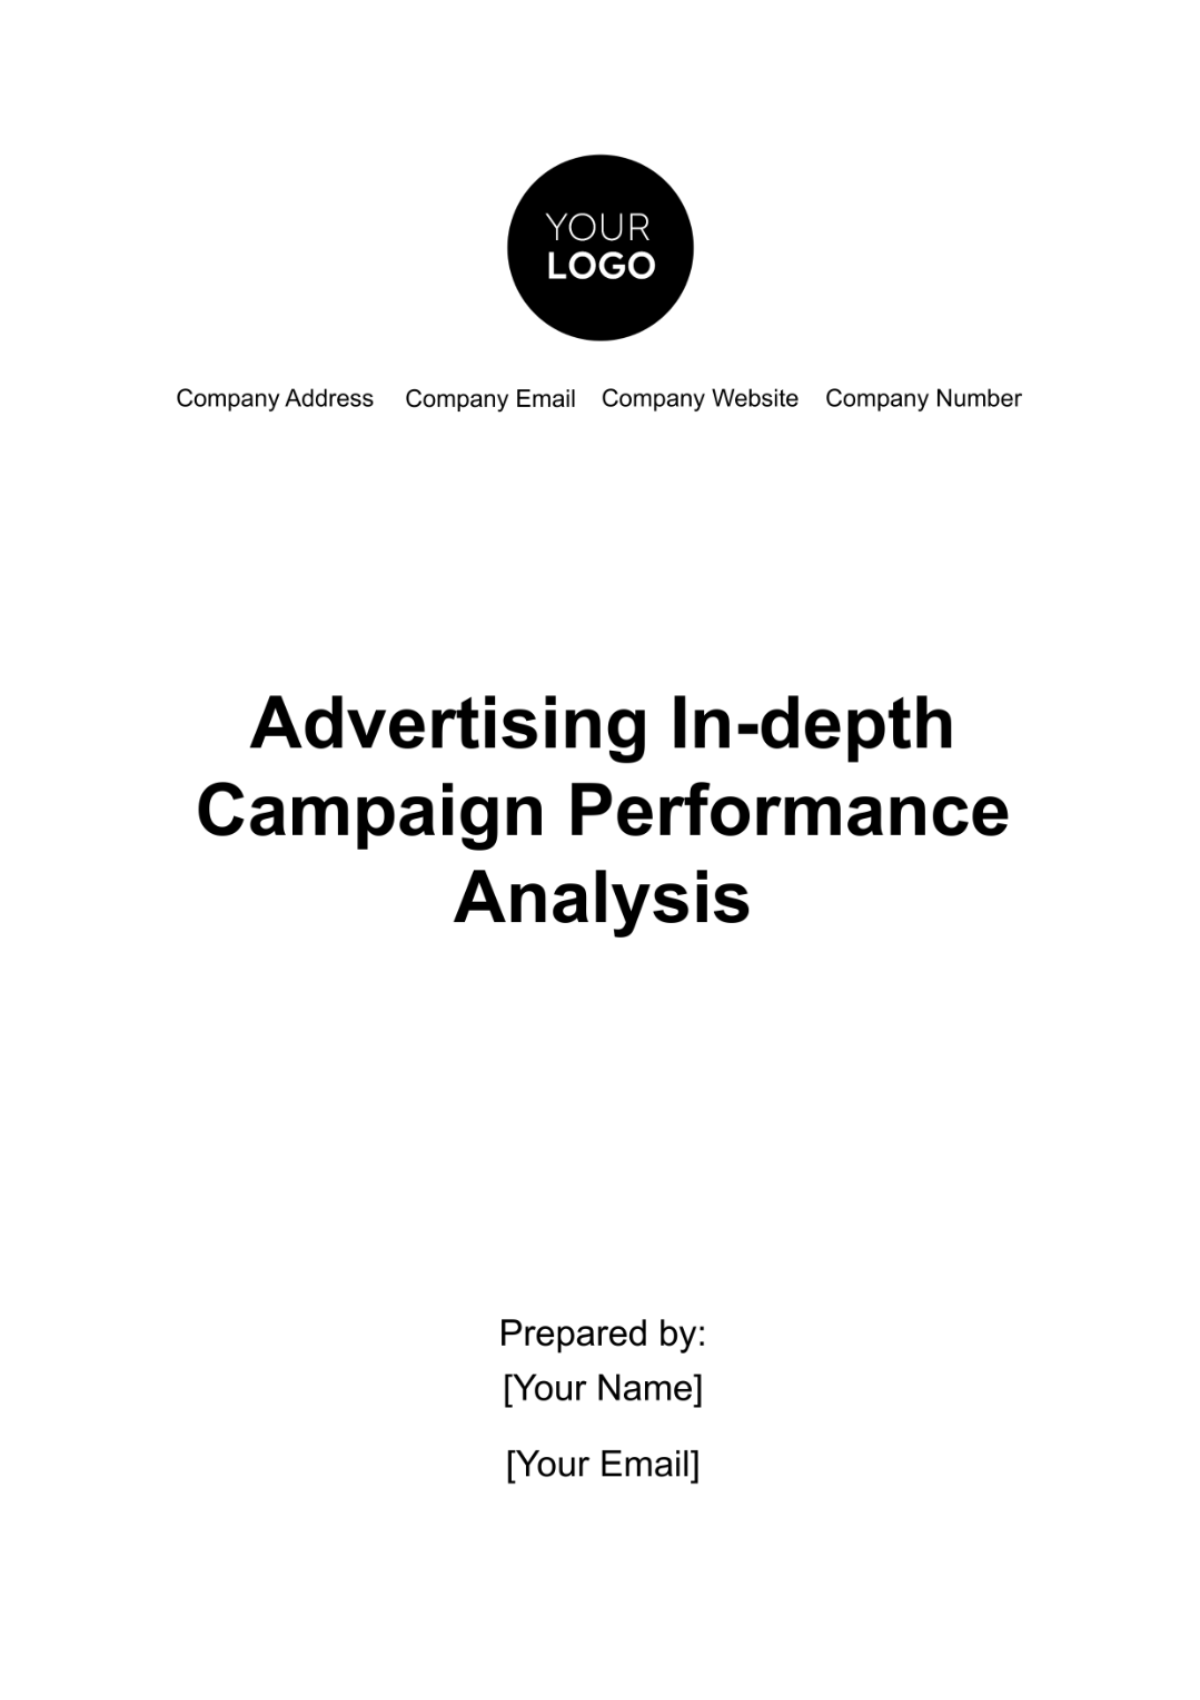 Advertising In-depth Campaign Performance Analysis Template